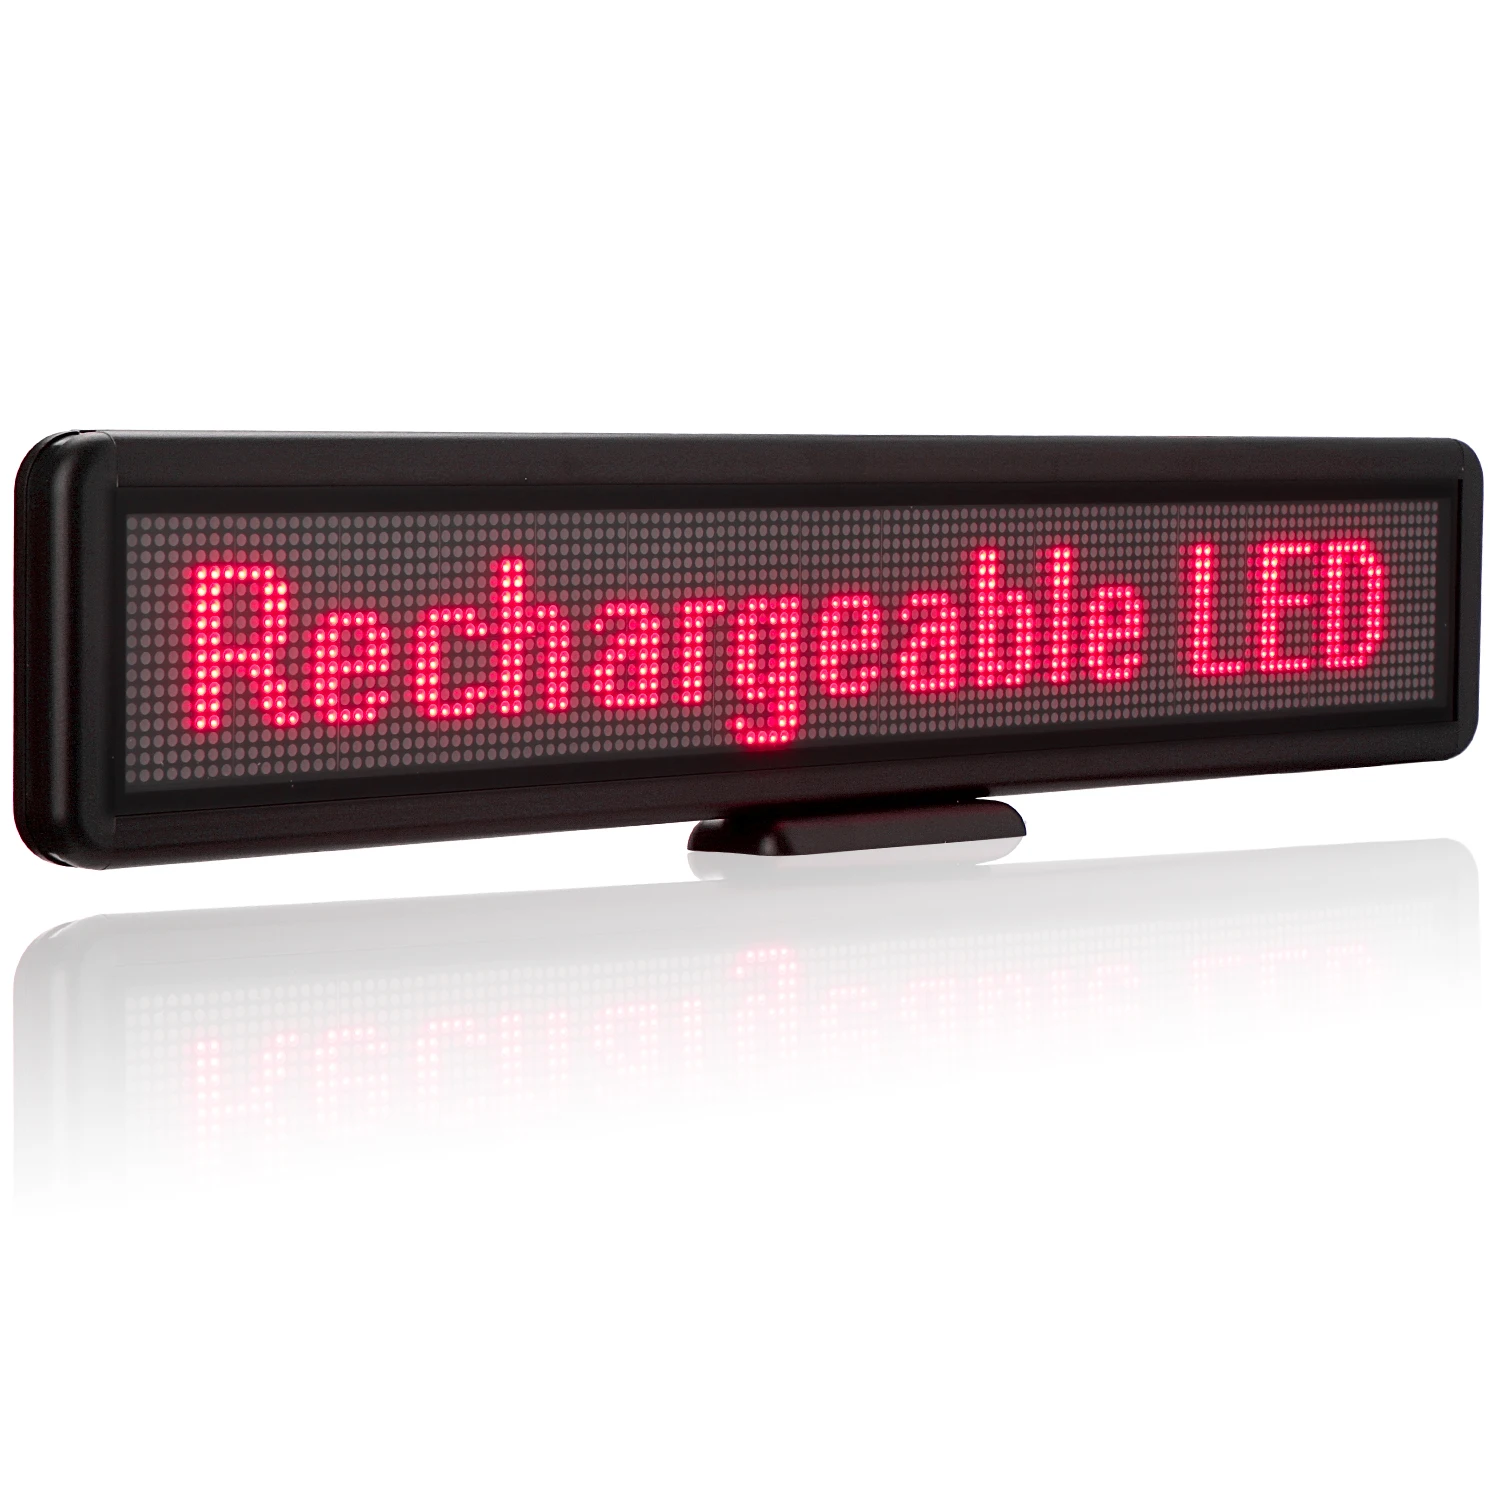 

12V Car Bus Led Sign Programmable Advertising Message board , Included Dc12v Cigar Lighter and Vacuum Suckers for Window Display